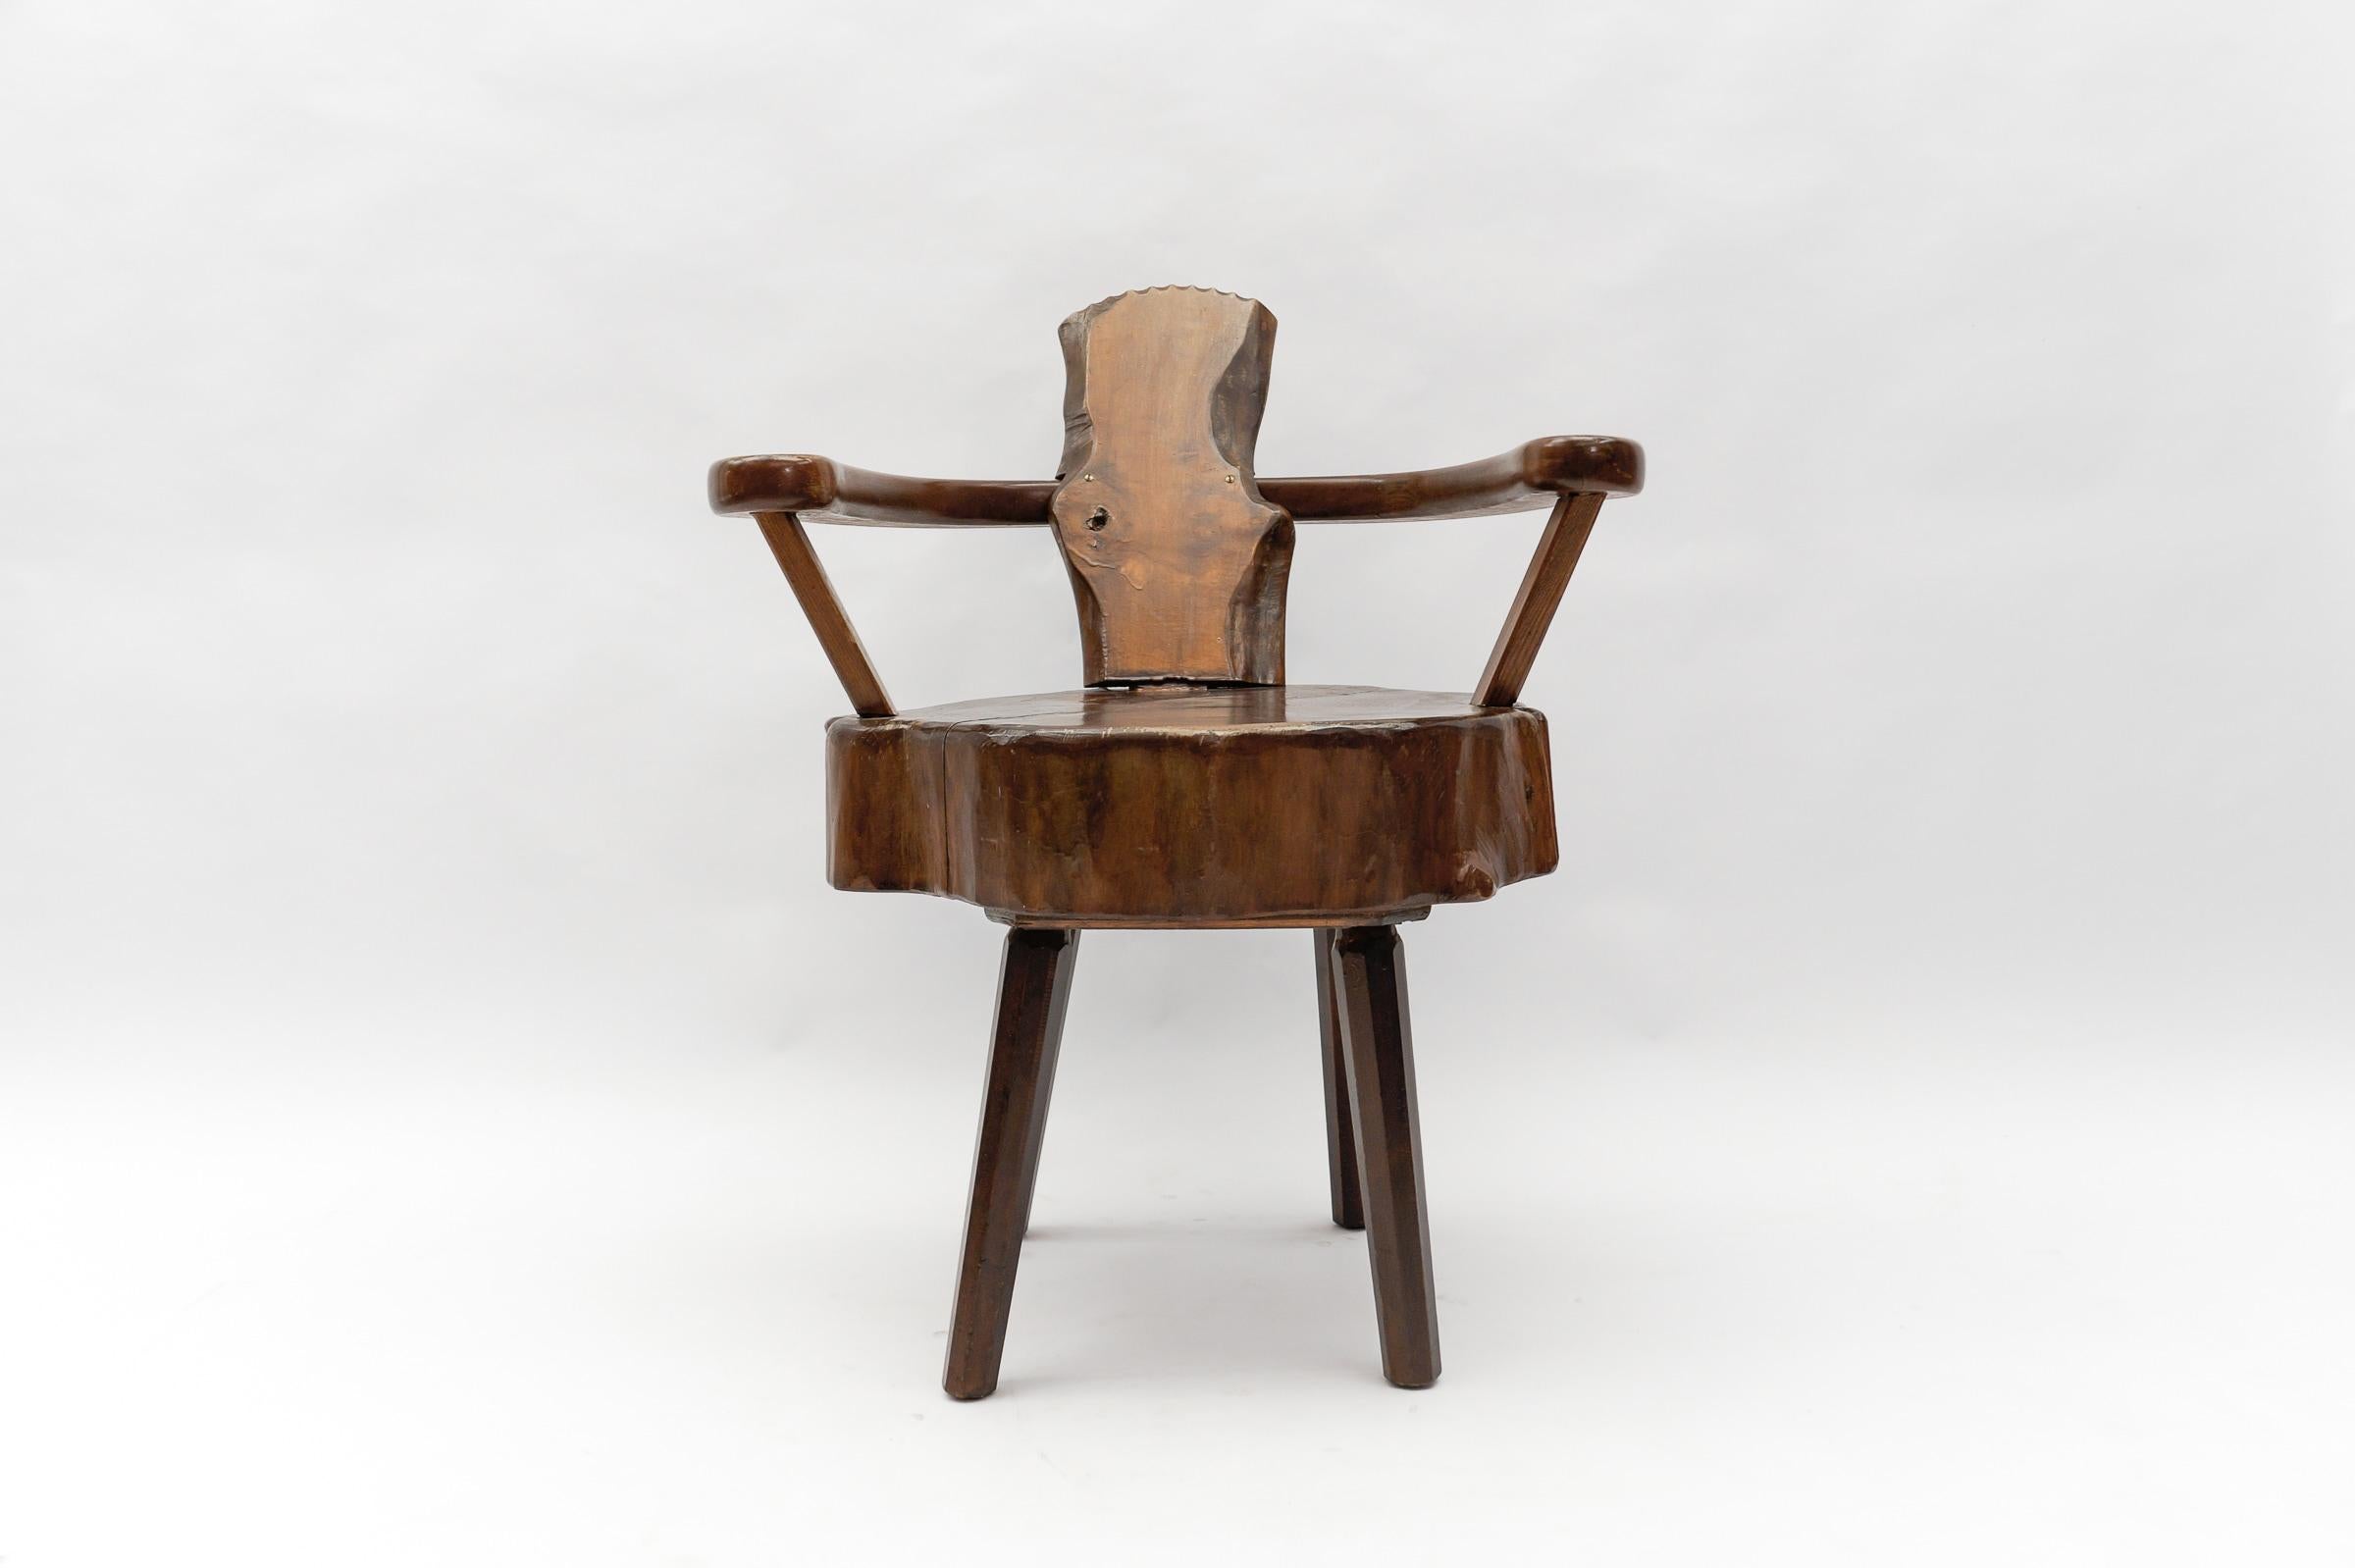 A total of four are available and are offered for sale here on the platform. 

Dark stained. Cool optic. Handmade imposing wooden armchair. Each armchair is unique.

This armchair here has a seat height of 50cm. The tree trunk thickness is 11cm.

 
